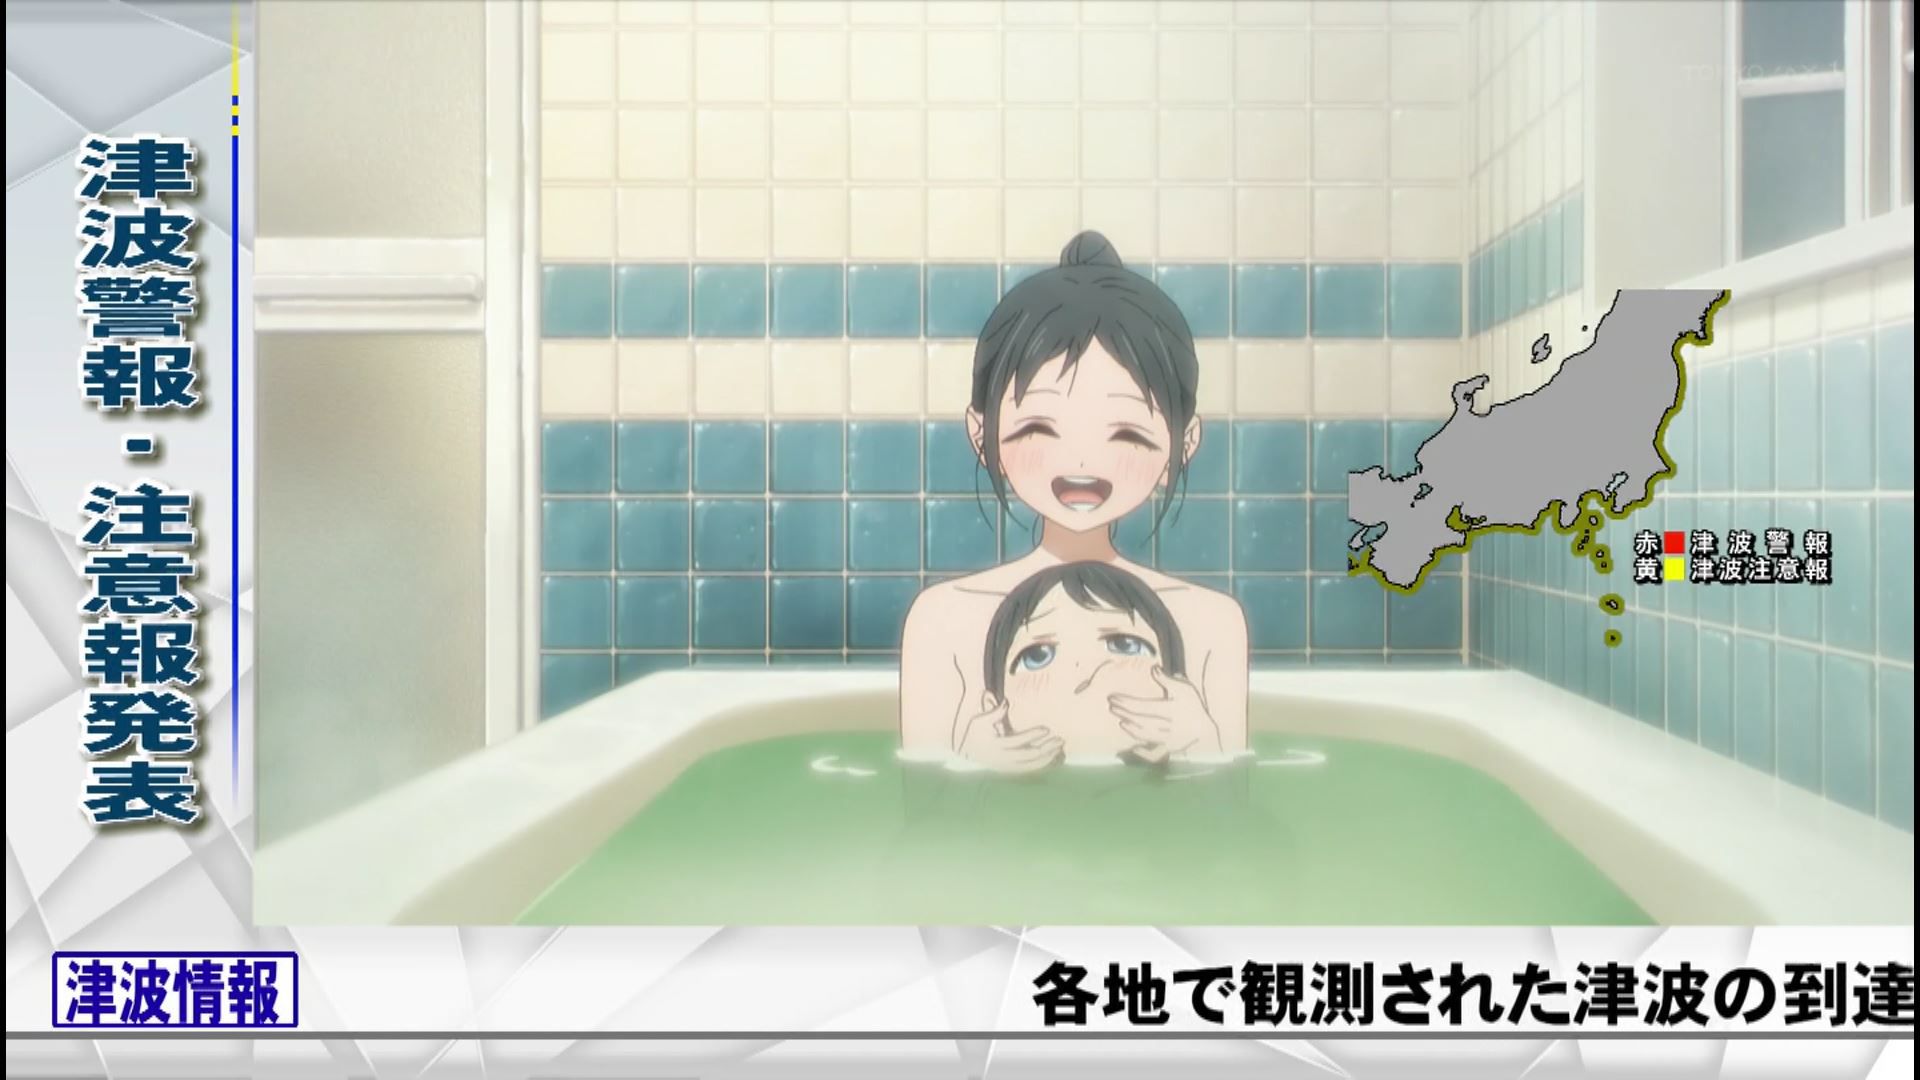 In the anime "Tomorrow-chan's Sailor Suit" episode 2, the girl's erotic bathing scene and the punchy scene 14